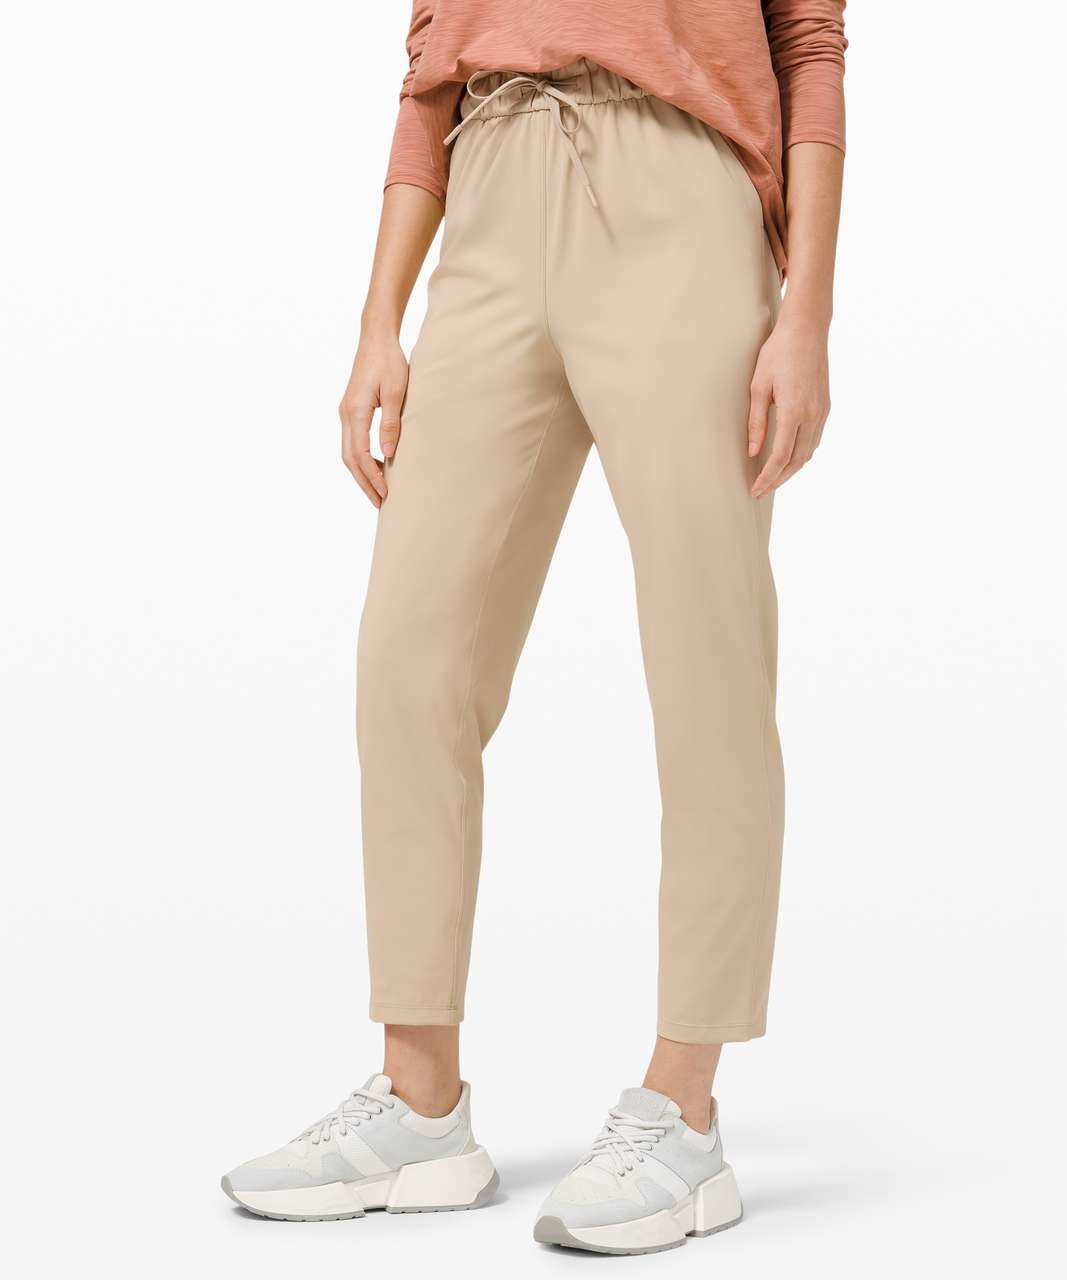 Lululemon Keep Moving Pant 7/8 High-Rise - Trench